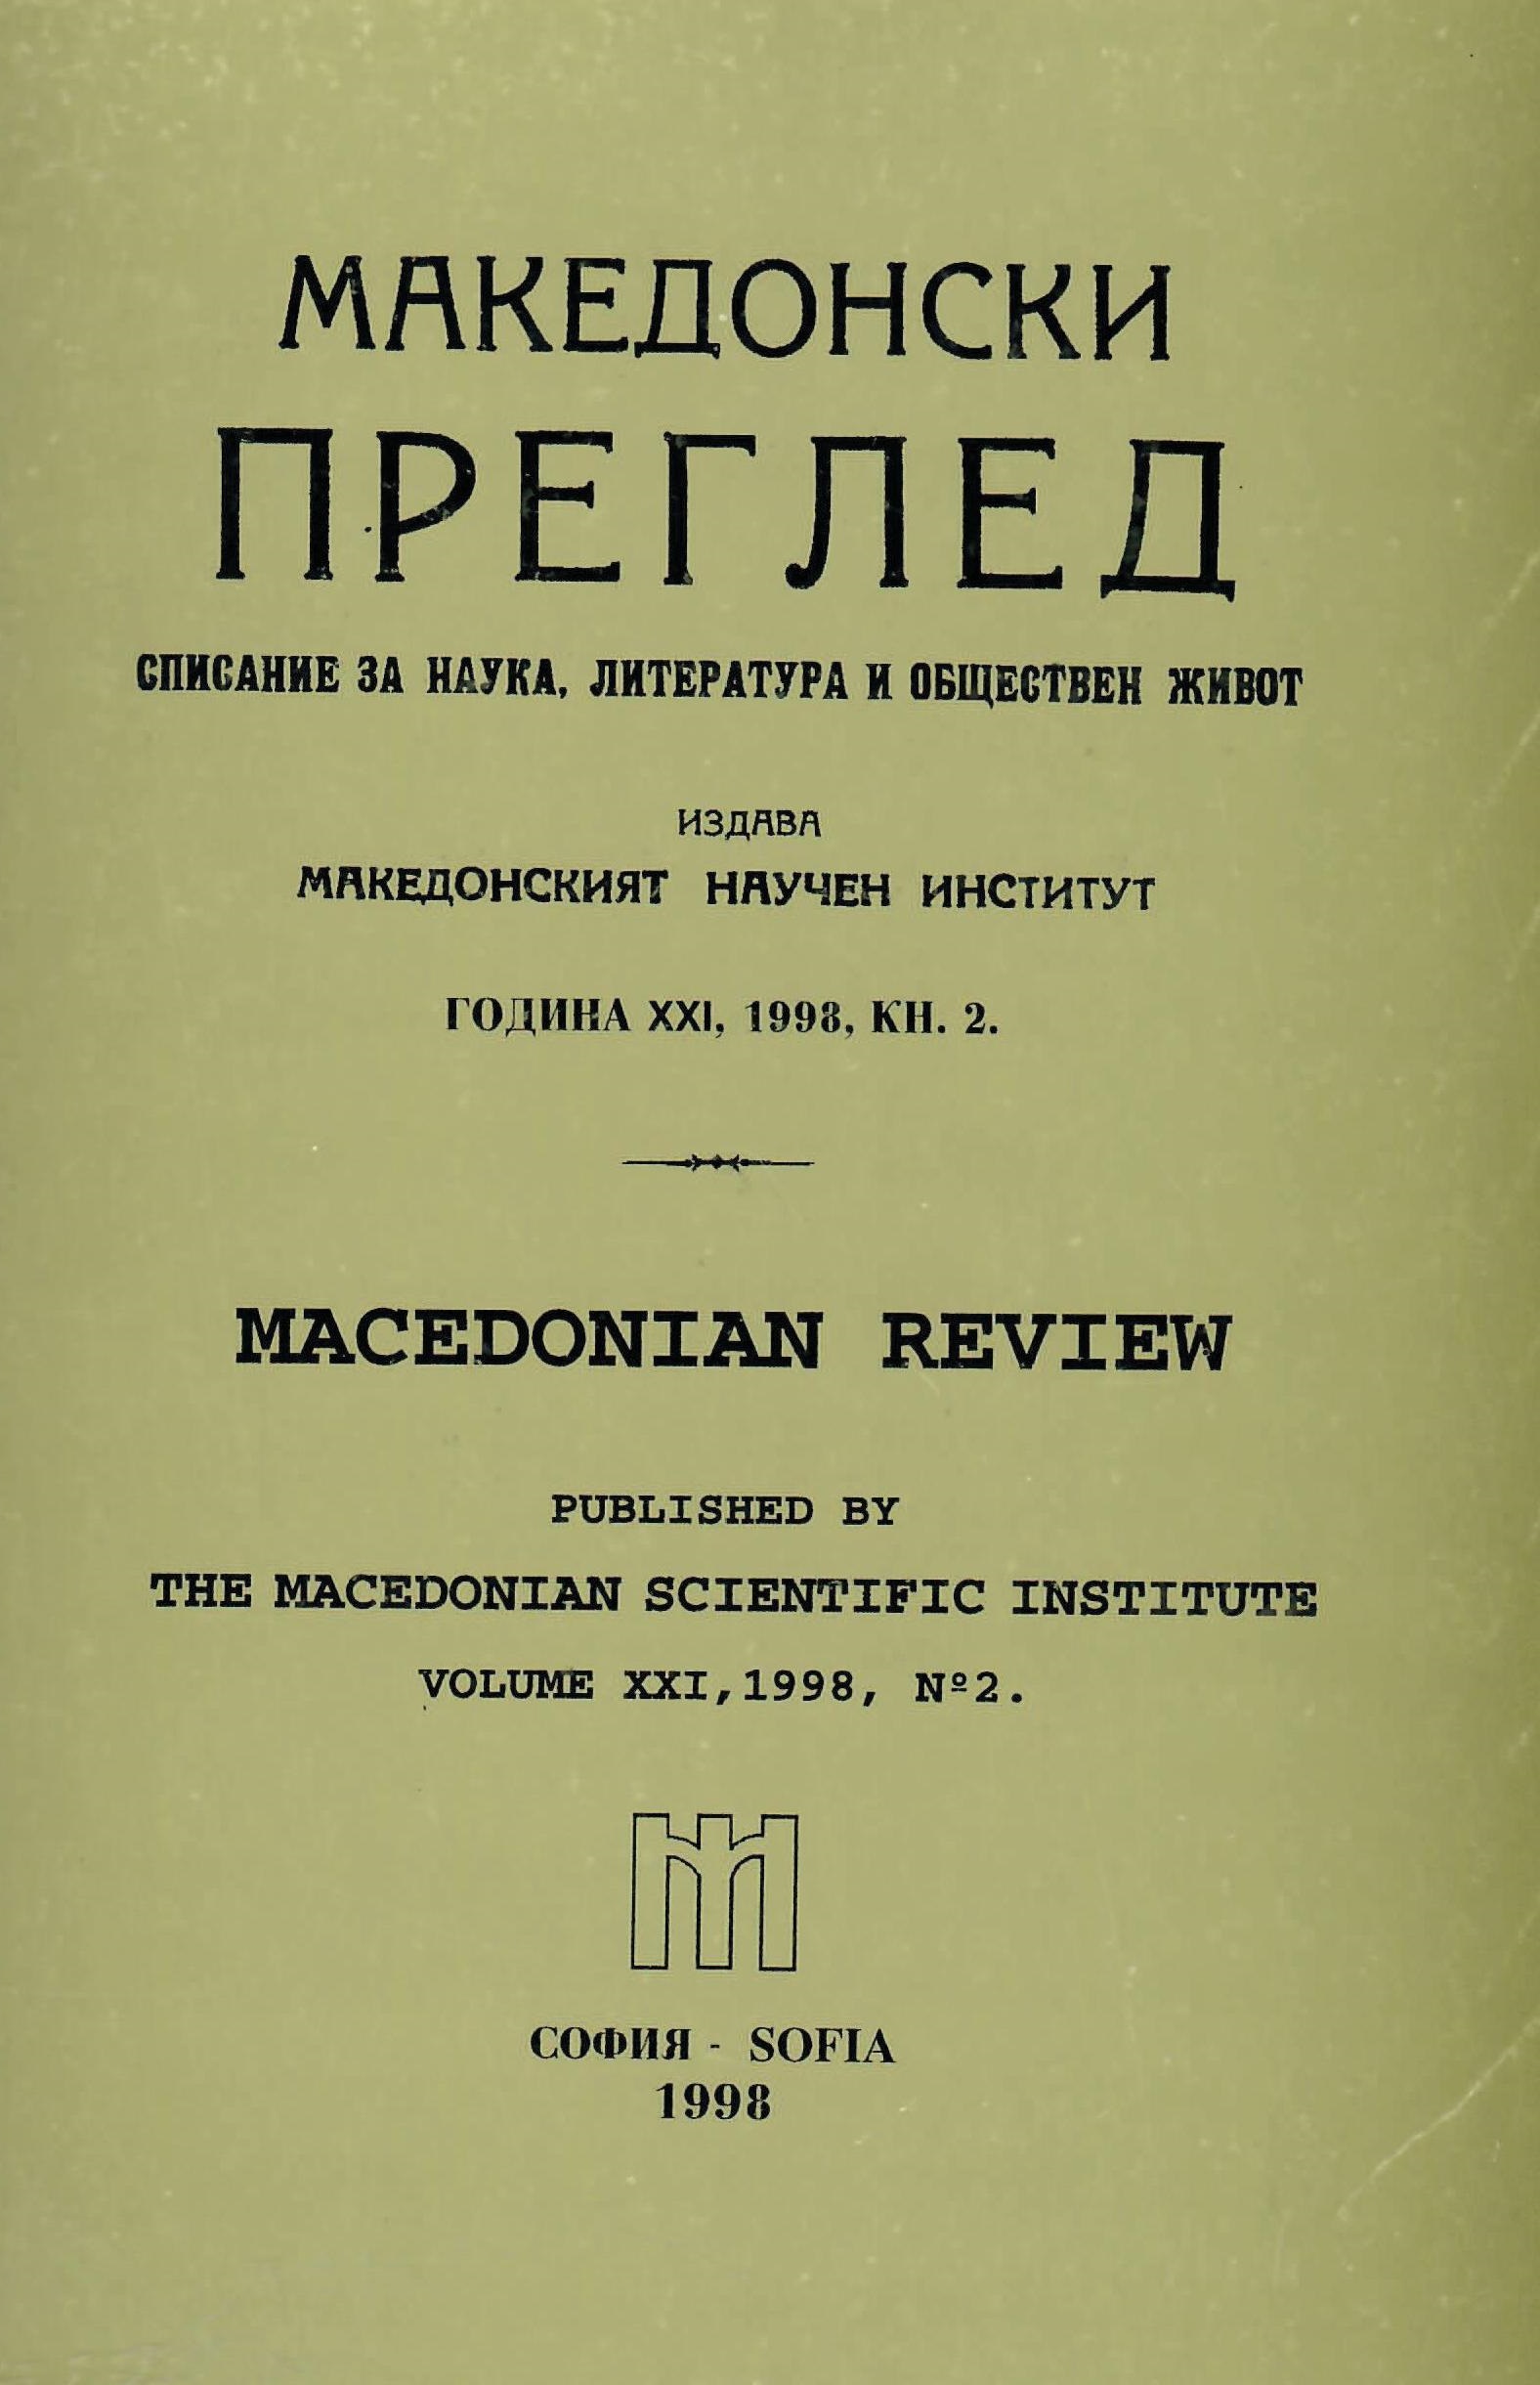 Declaration of the Macedonian Scientific Institute (on the occasion of the Skopje Meeting - 24 April 1998, of a group of intellectuals, organized by the Helsinki Committees of the two countries) Cover Image